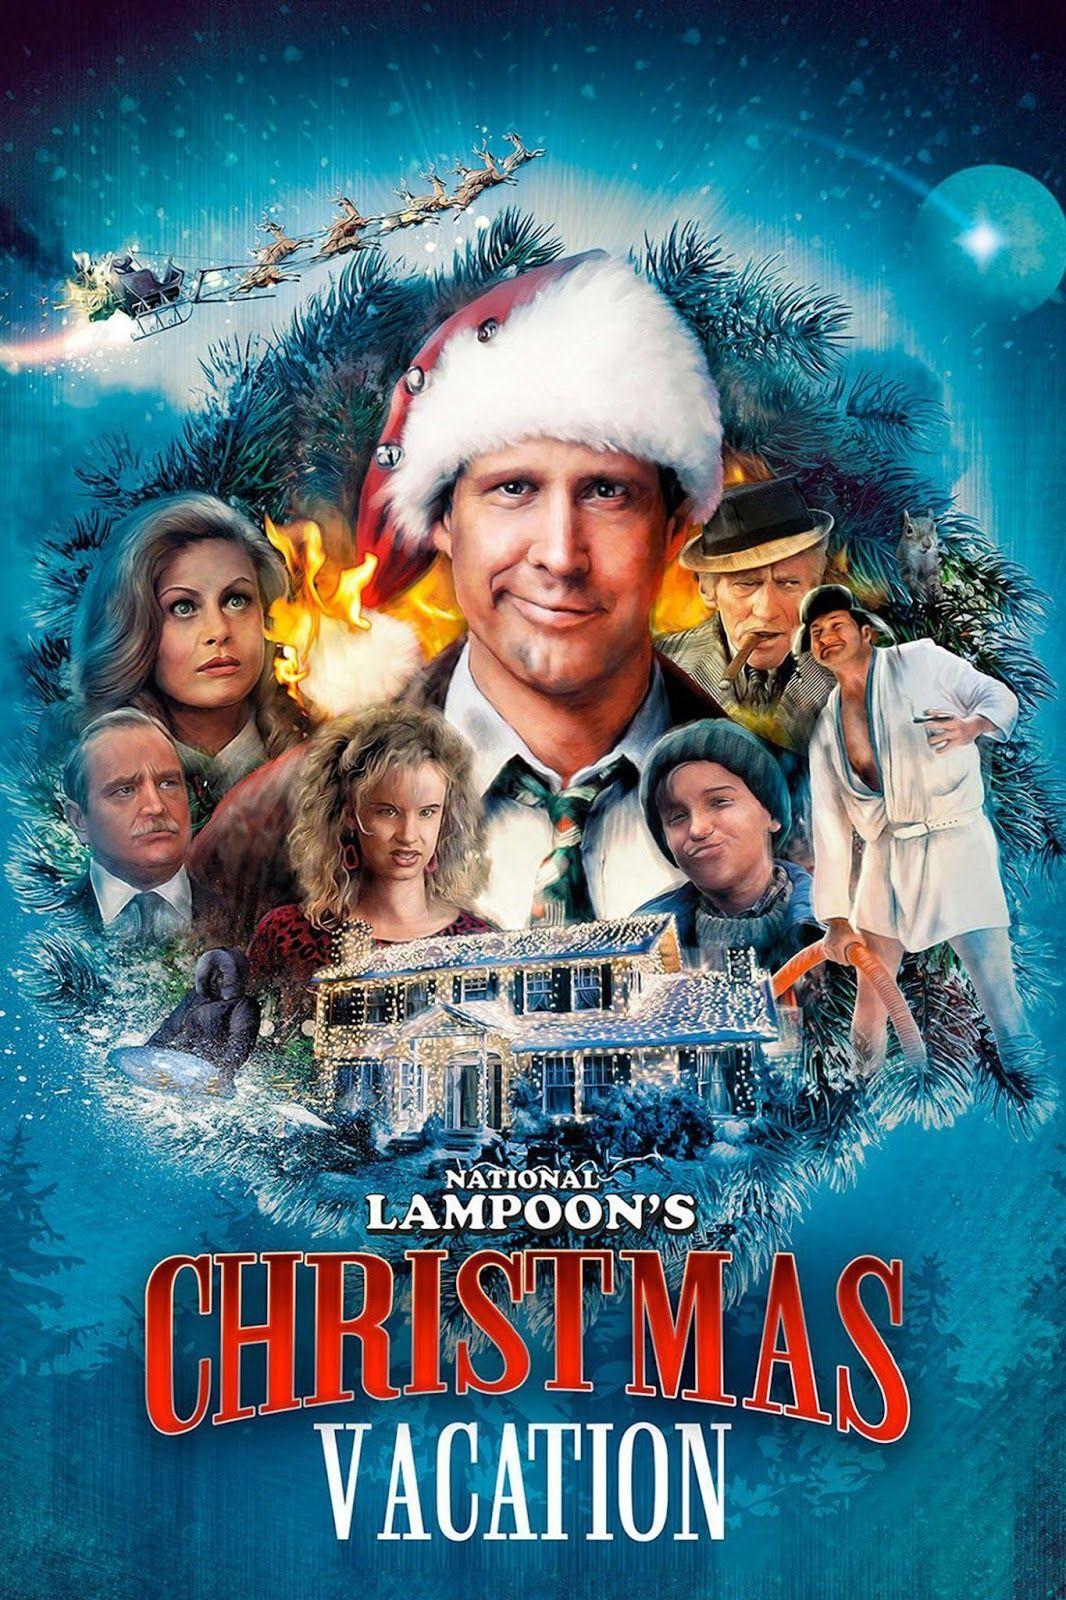 iPhone Wallpaper: National Lampoon's Christmas Vacation iPhone